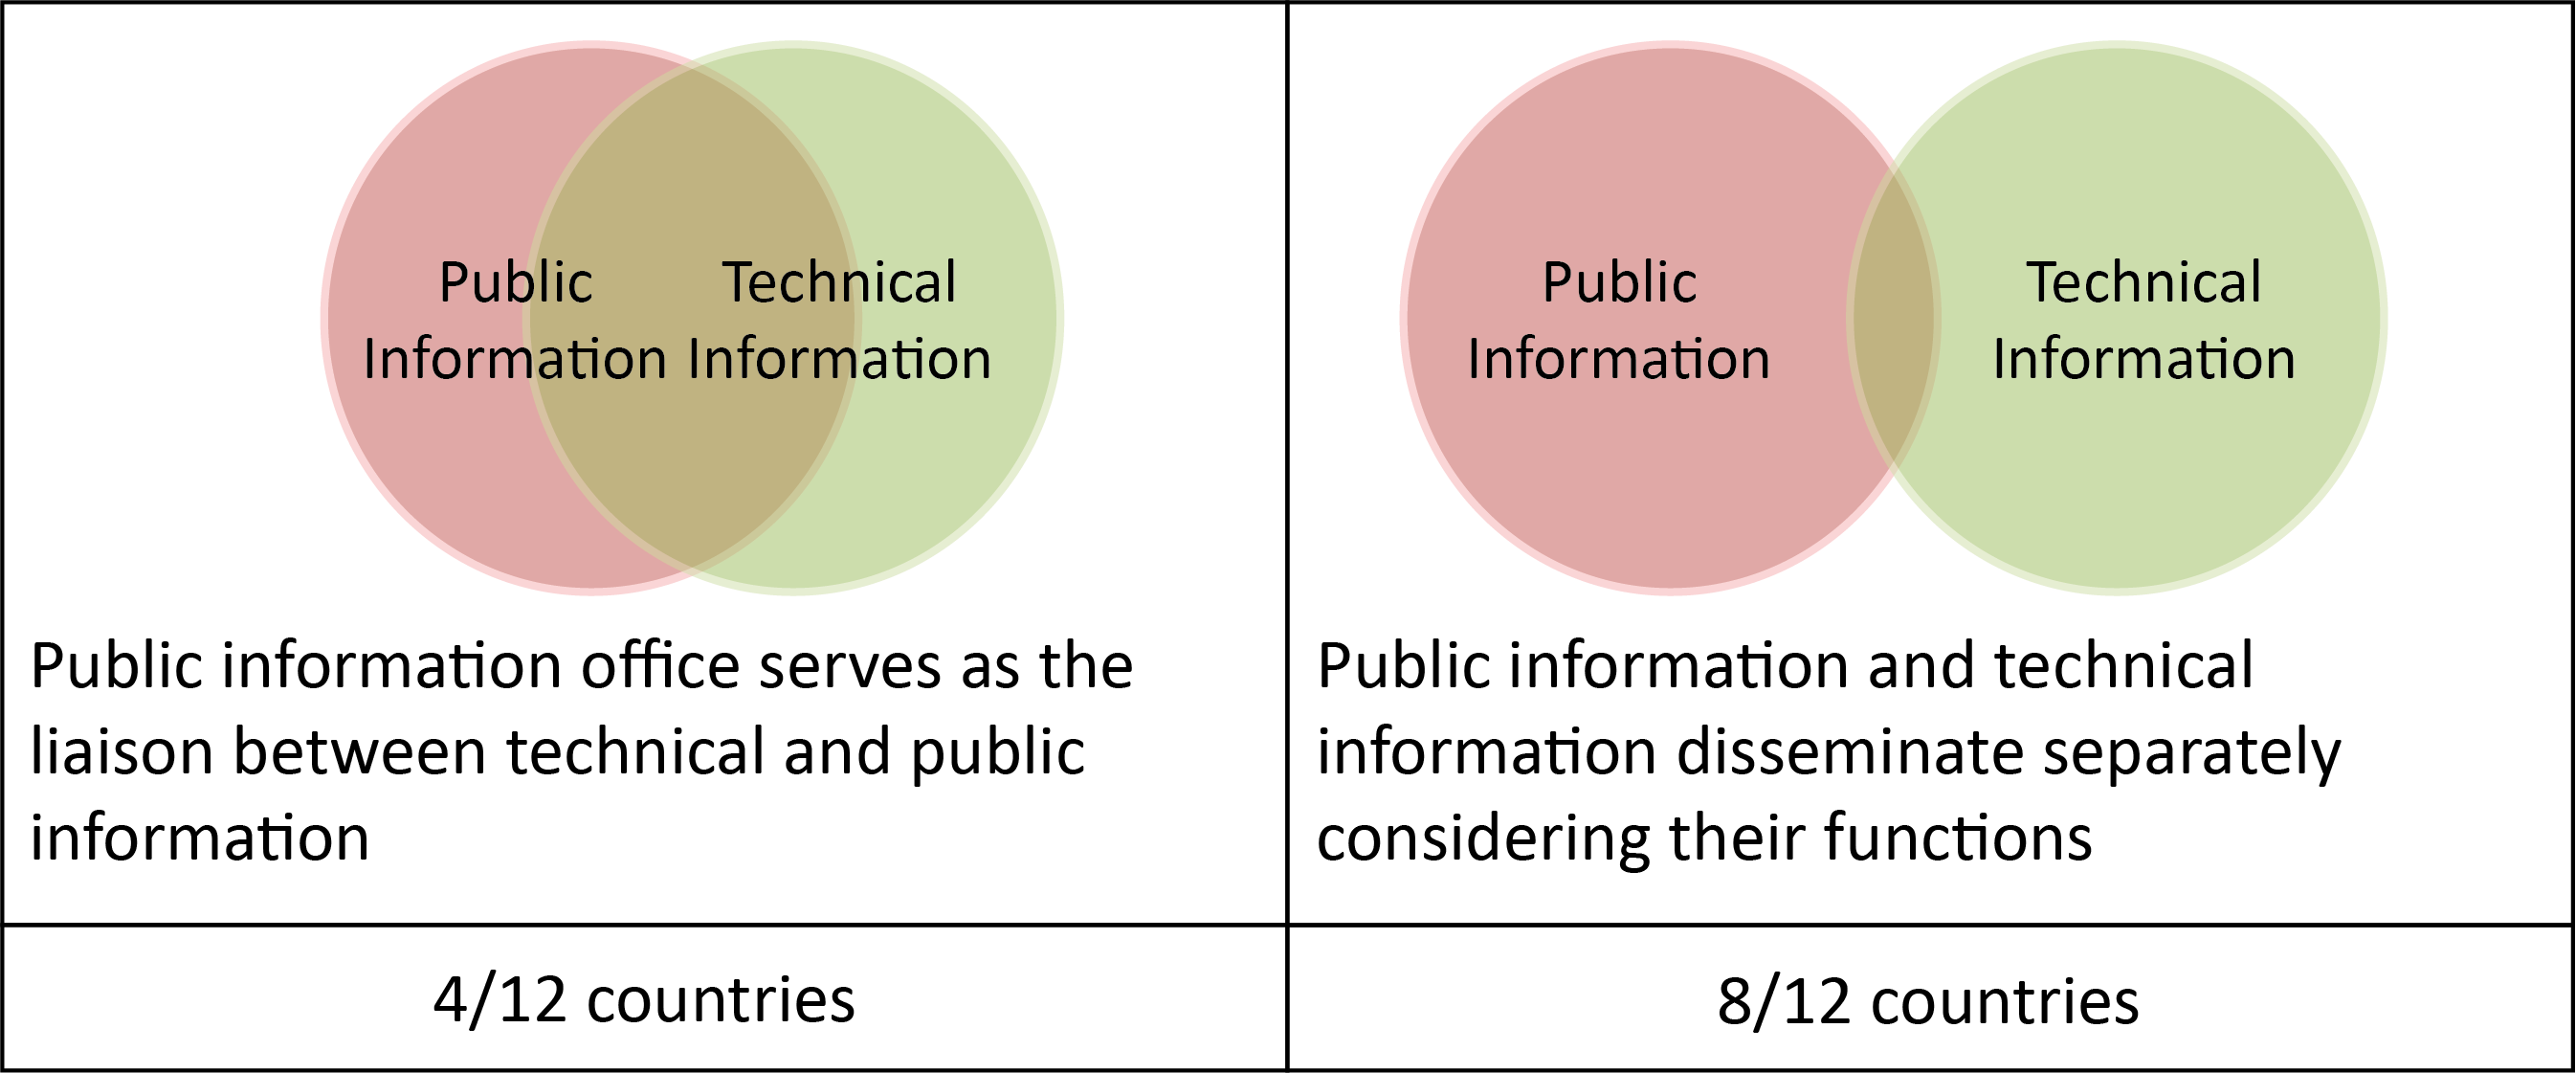 Figure 4.2.2.7 Public Information and Technical Information